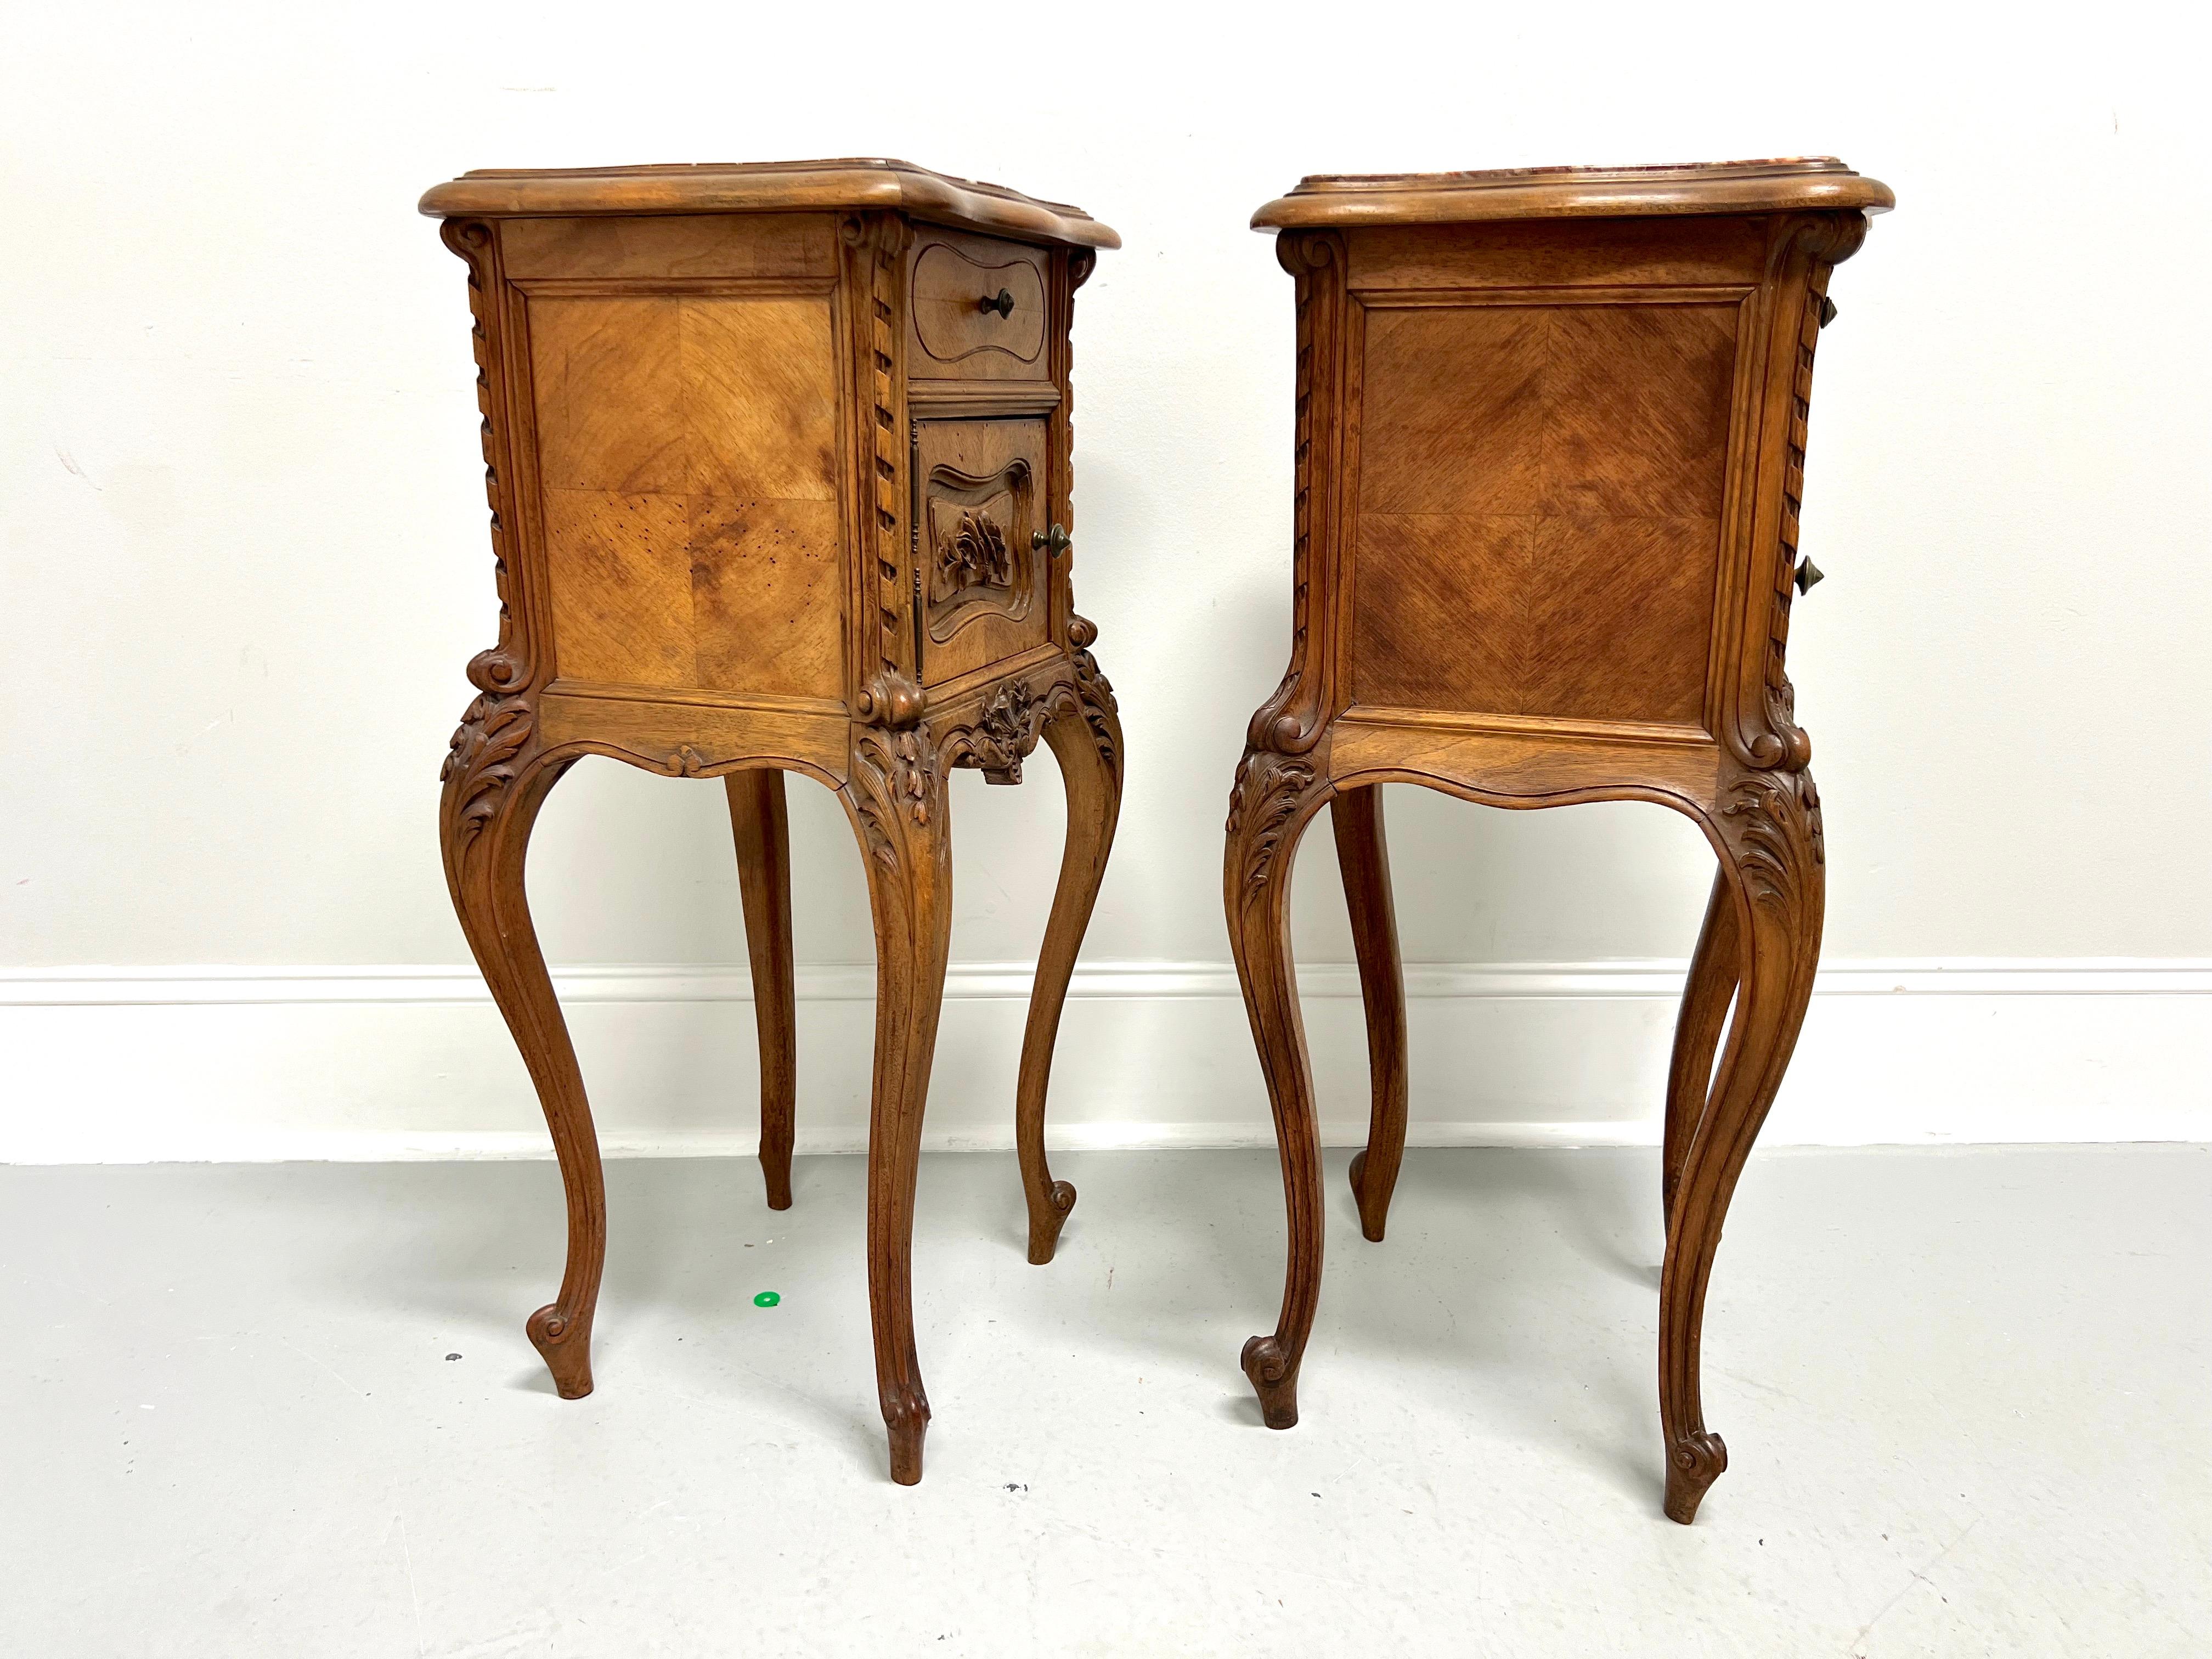 20th Century Antique Carved Chestnut French Country Louis XV Commodes / Nightstands - Pair